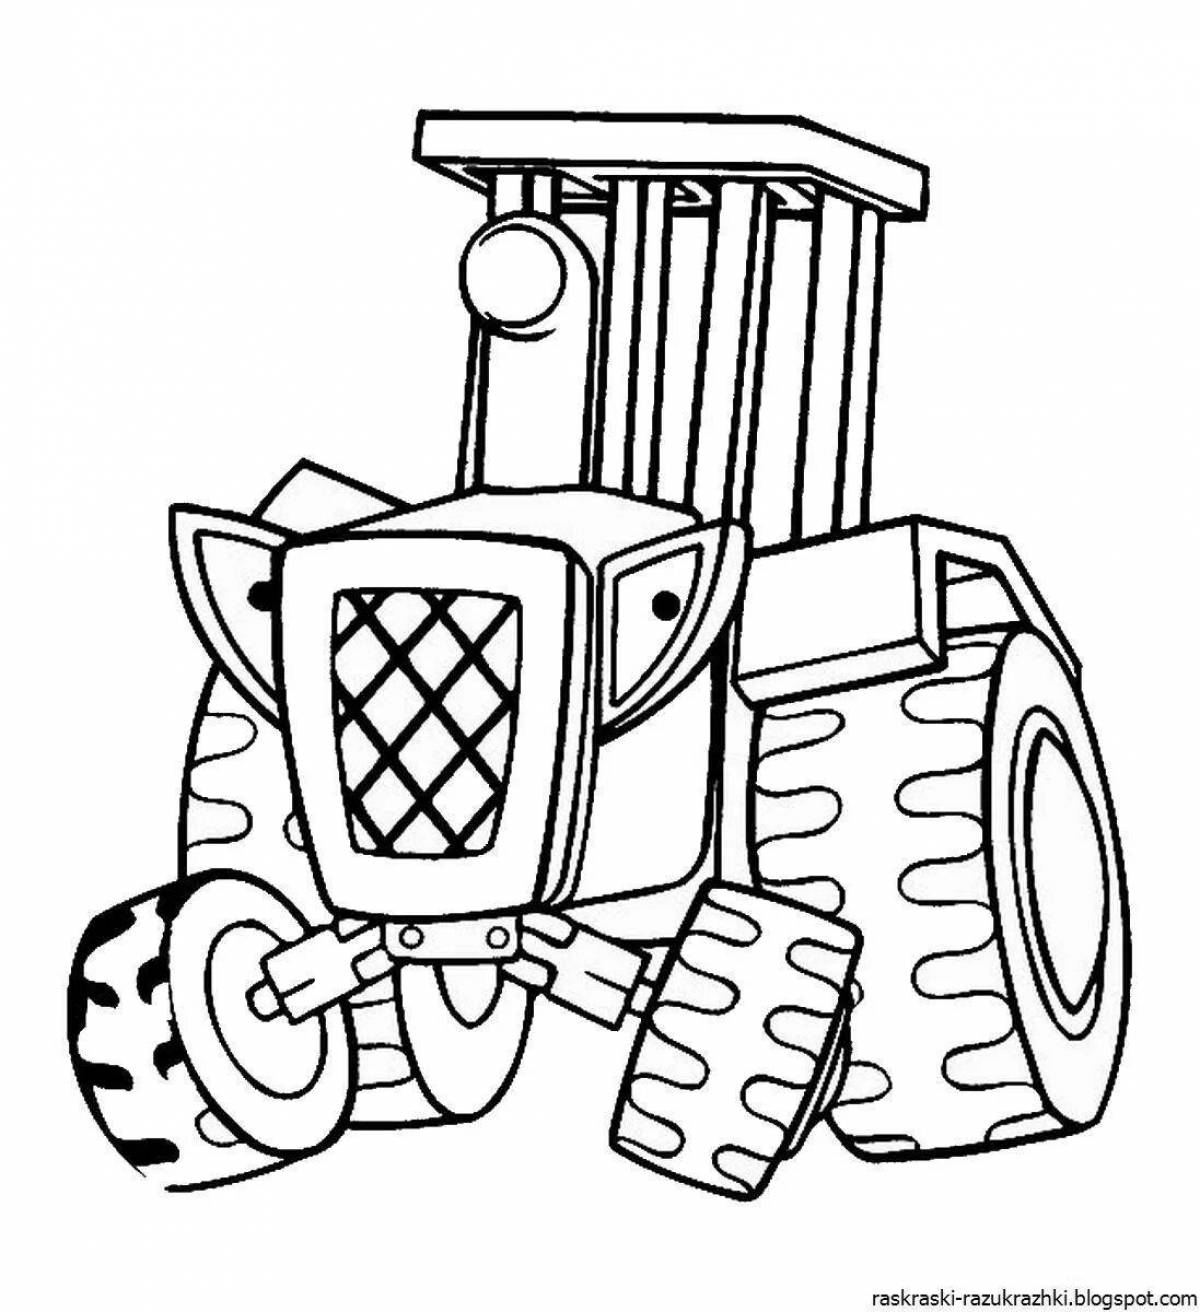 Attractive drawing of a tractor